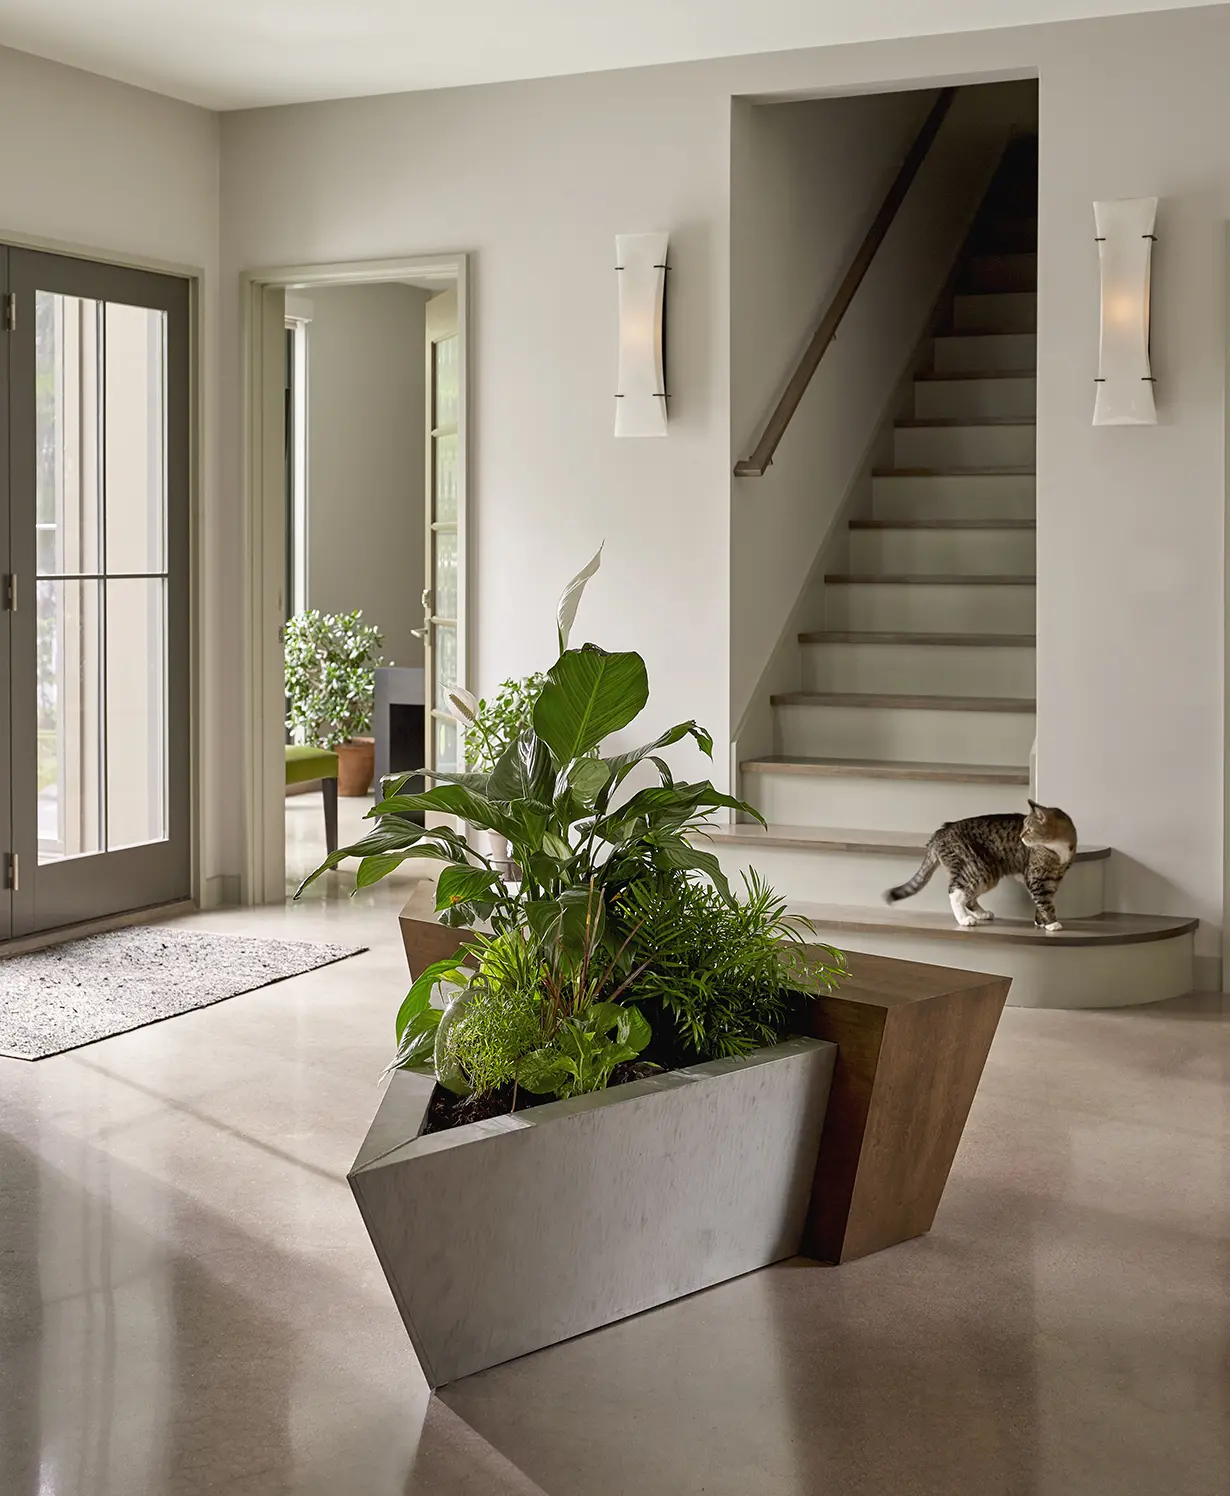 Hallway with built in geometric plant holder